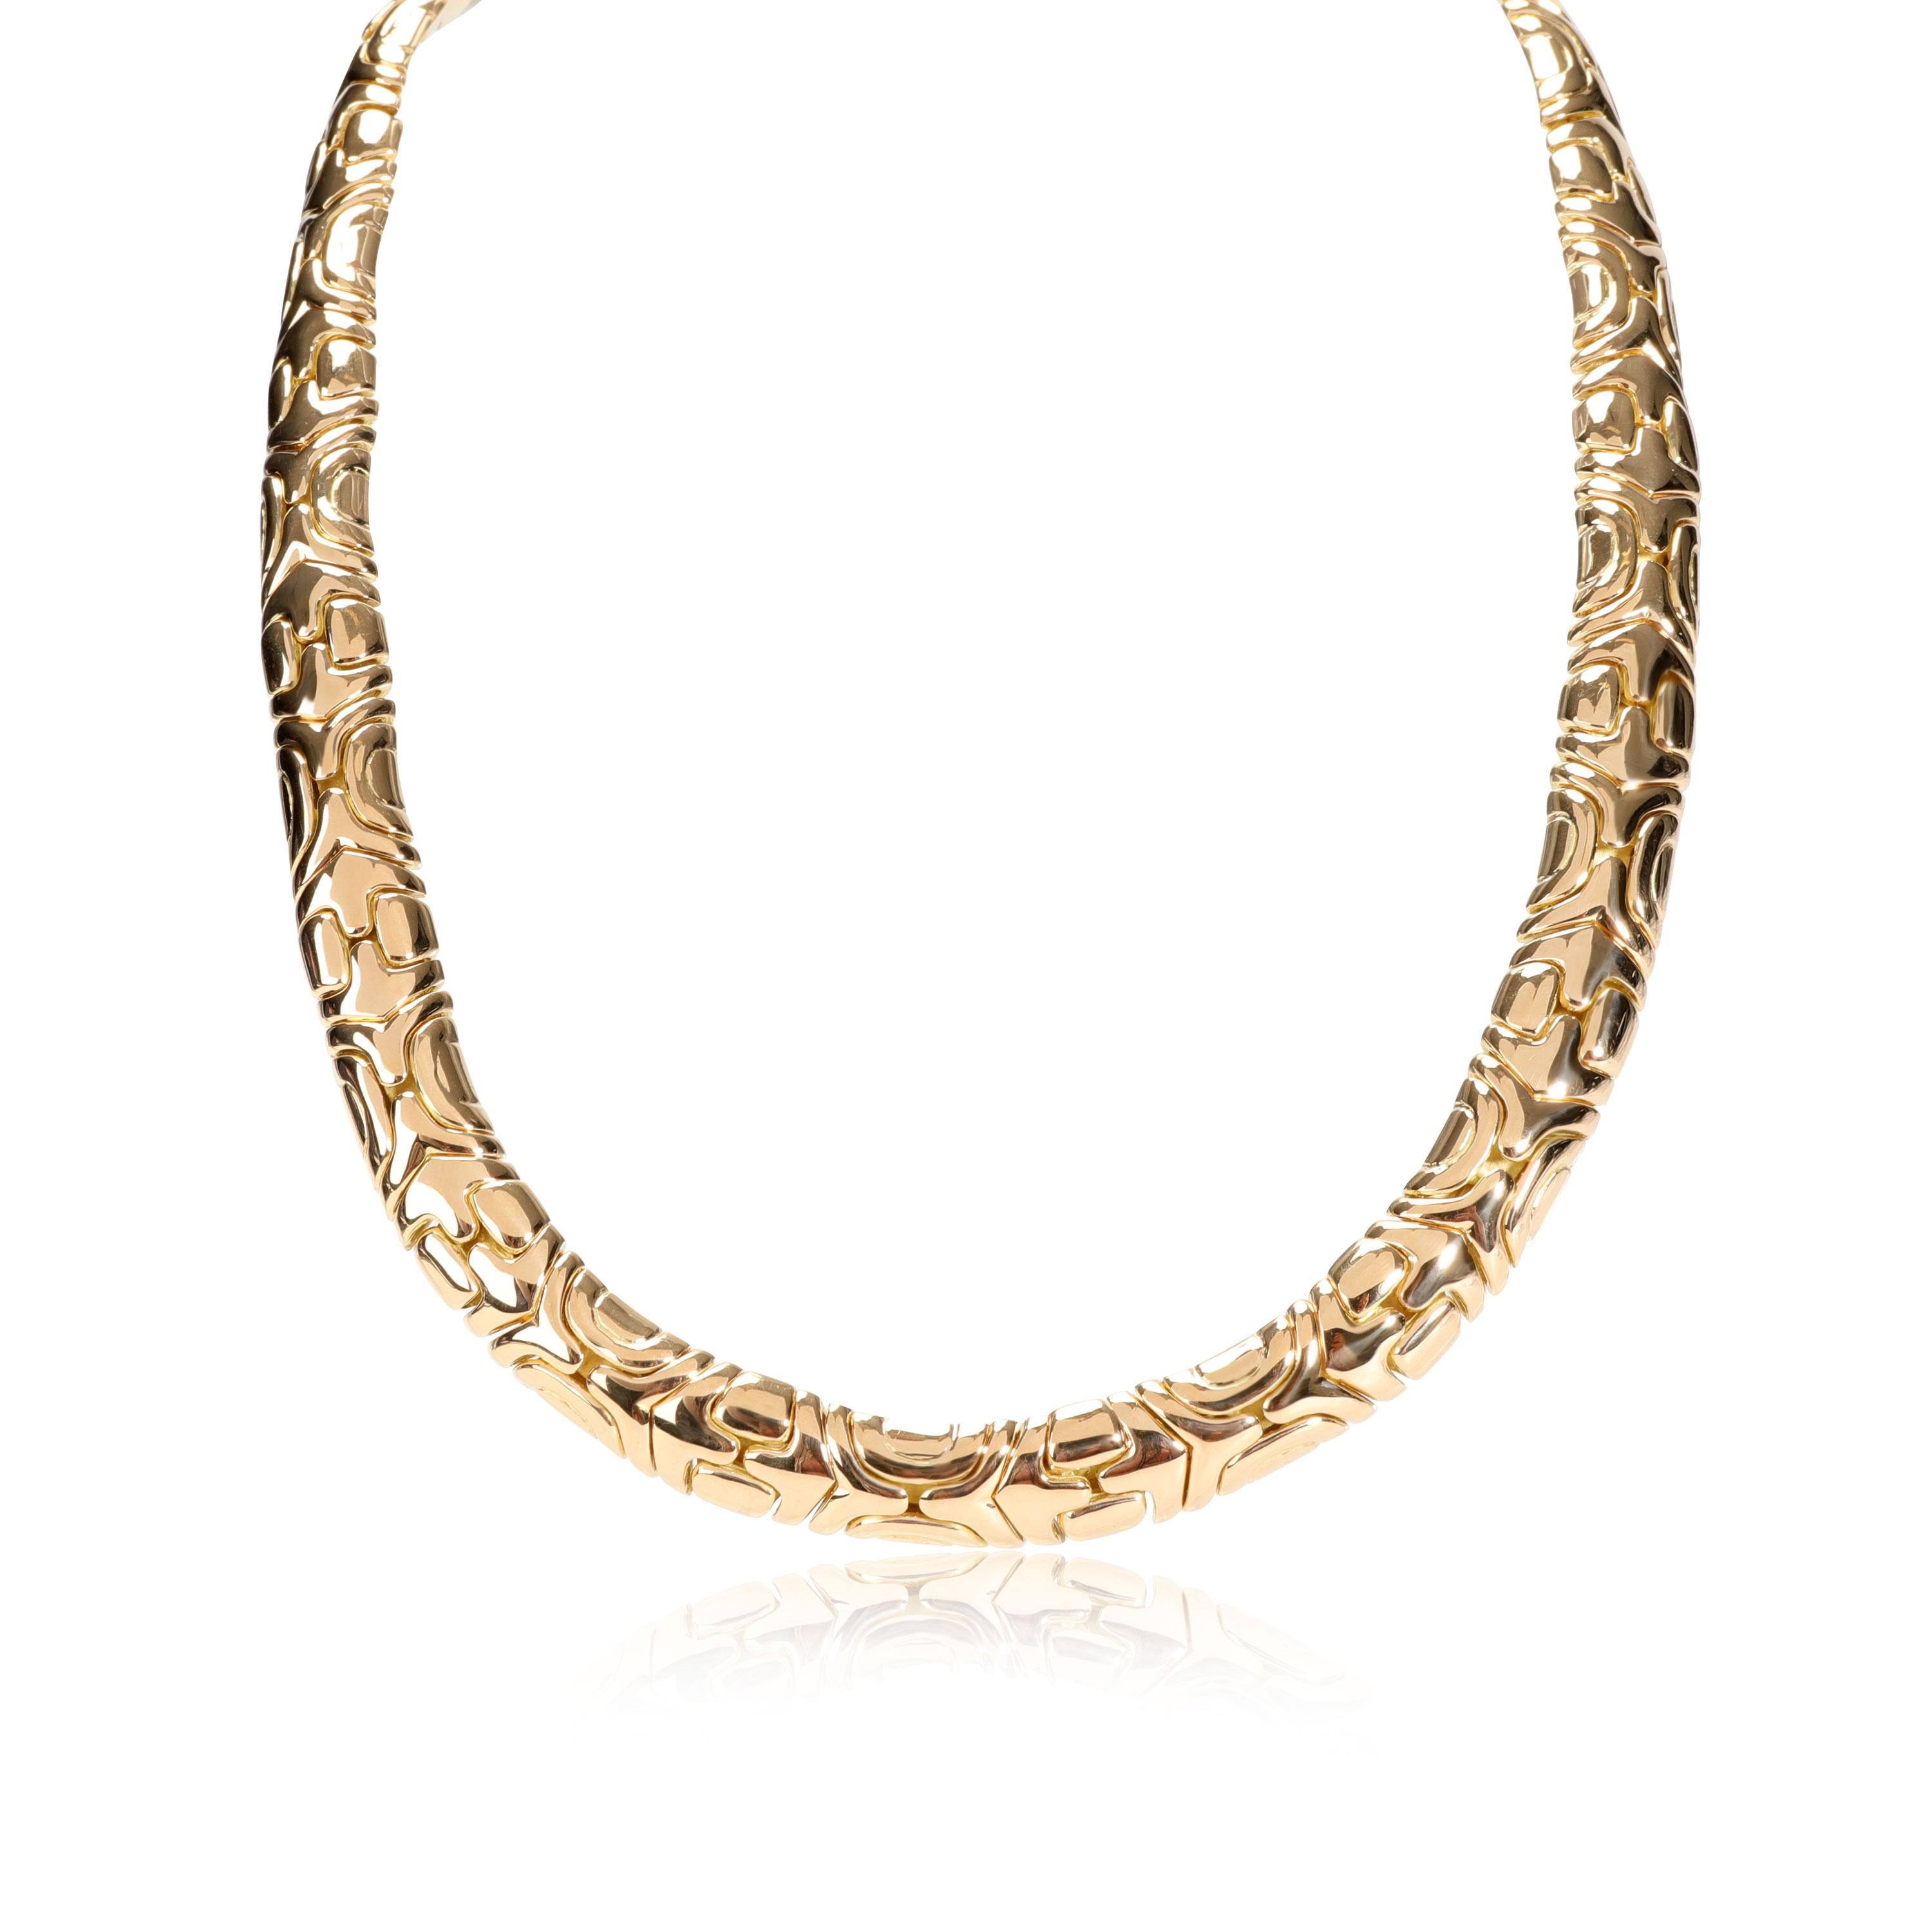 
Bulgari Alveare Choker Necklace in 18K Yellow Gold

PRIMARY DETAILS
SKU: 112830
Listing Title: Bulgari Alveare Choker Necklace in 18K Yellow Gold
Condition Description: Retails for 27,000 USD. In excellent condition and recently polished. Inside